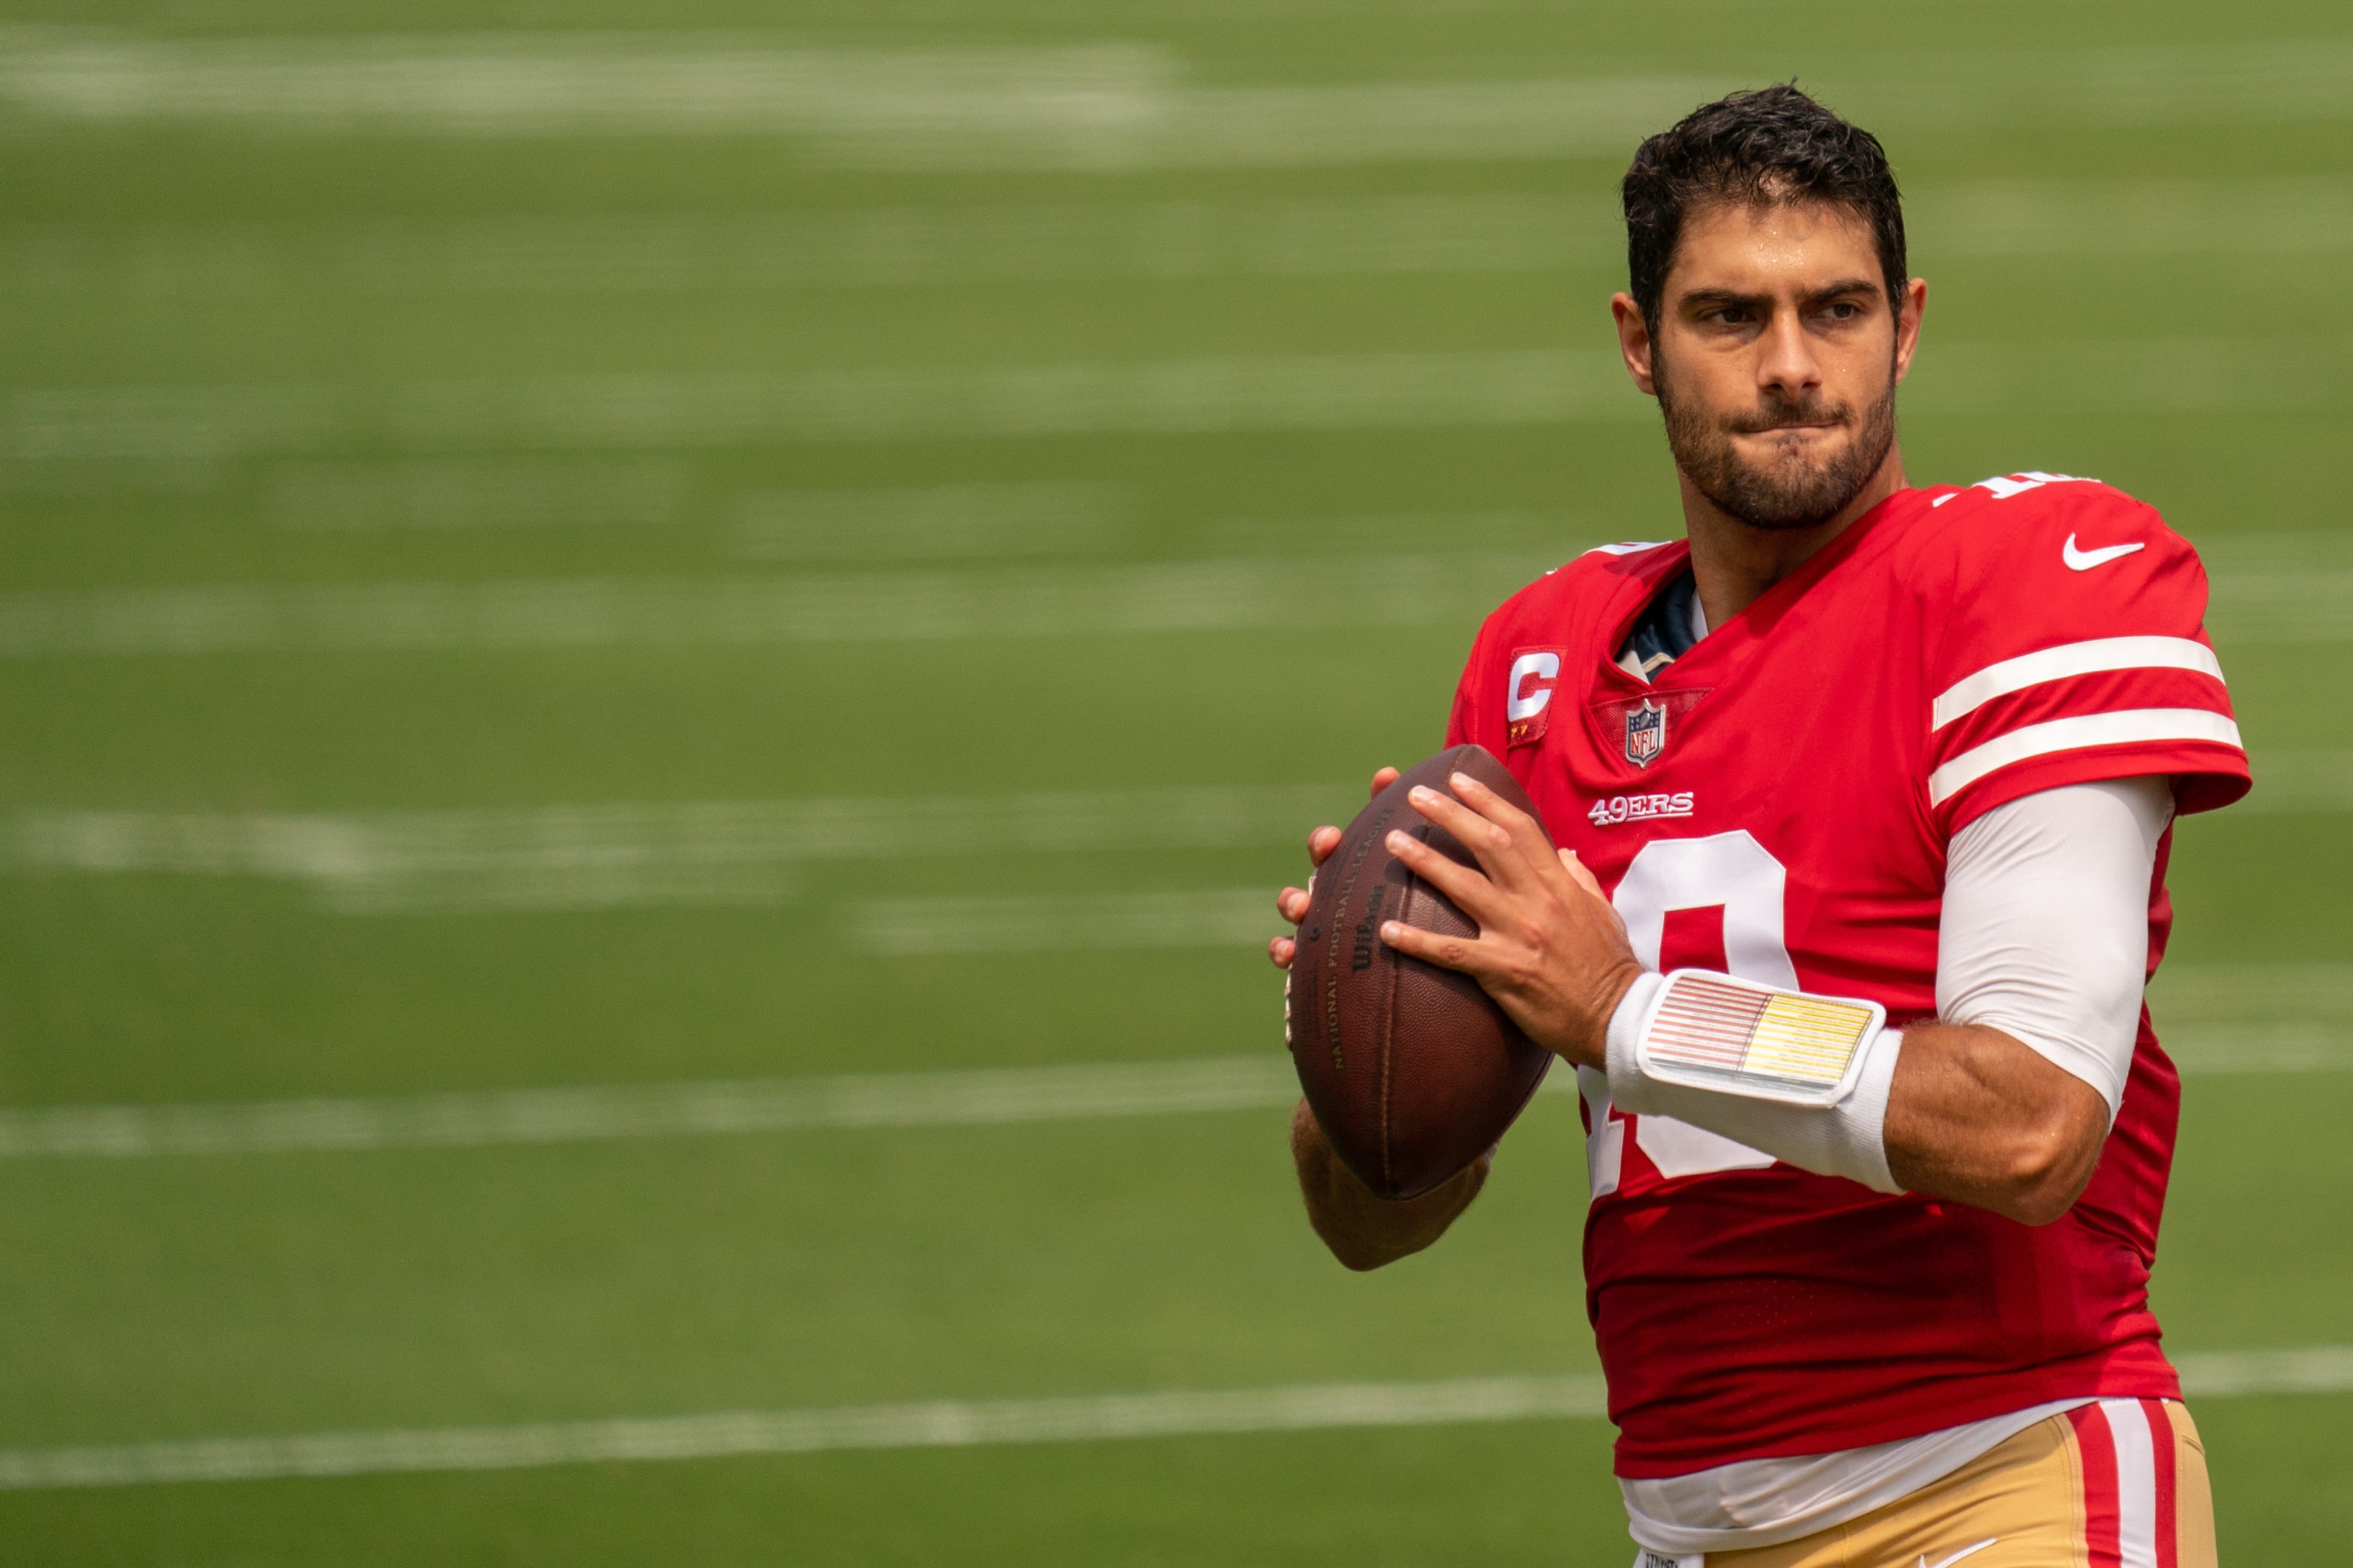 49ers: 3 options to upgrade over Jimmy Garoppolo